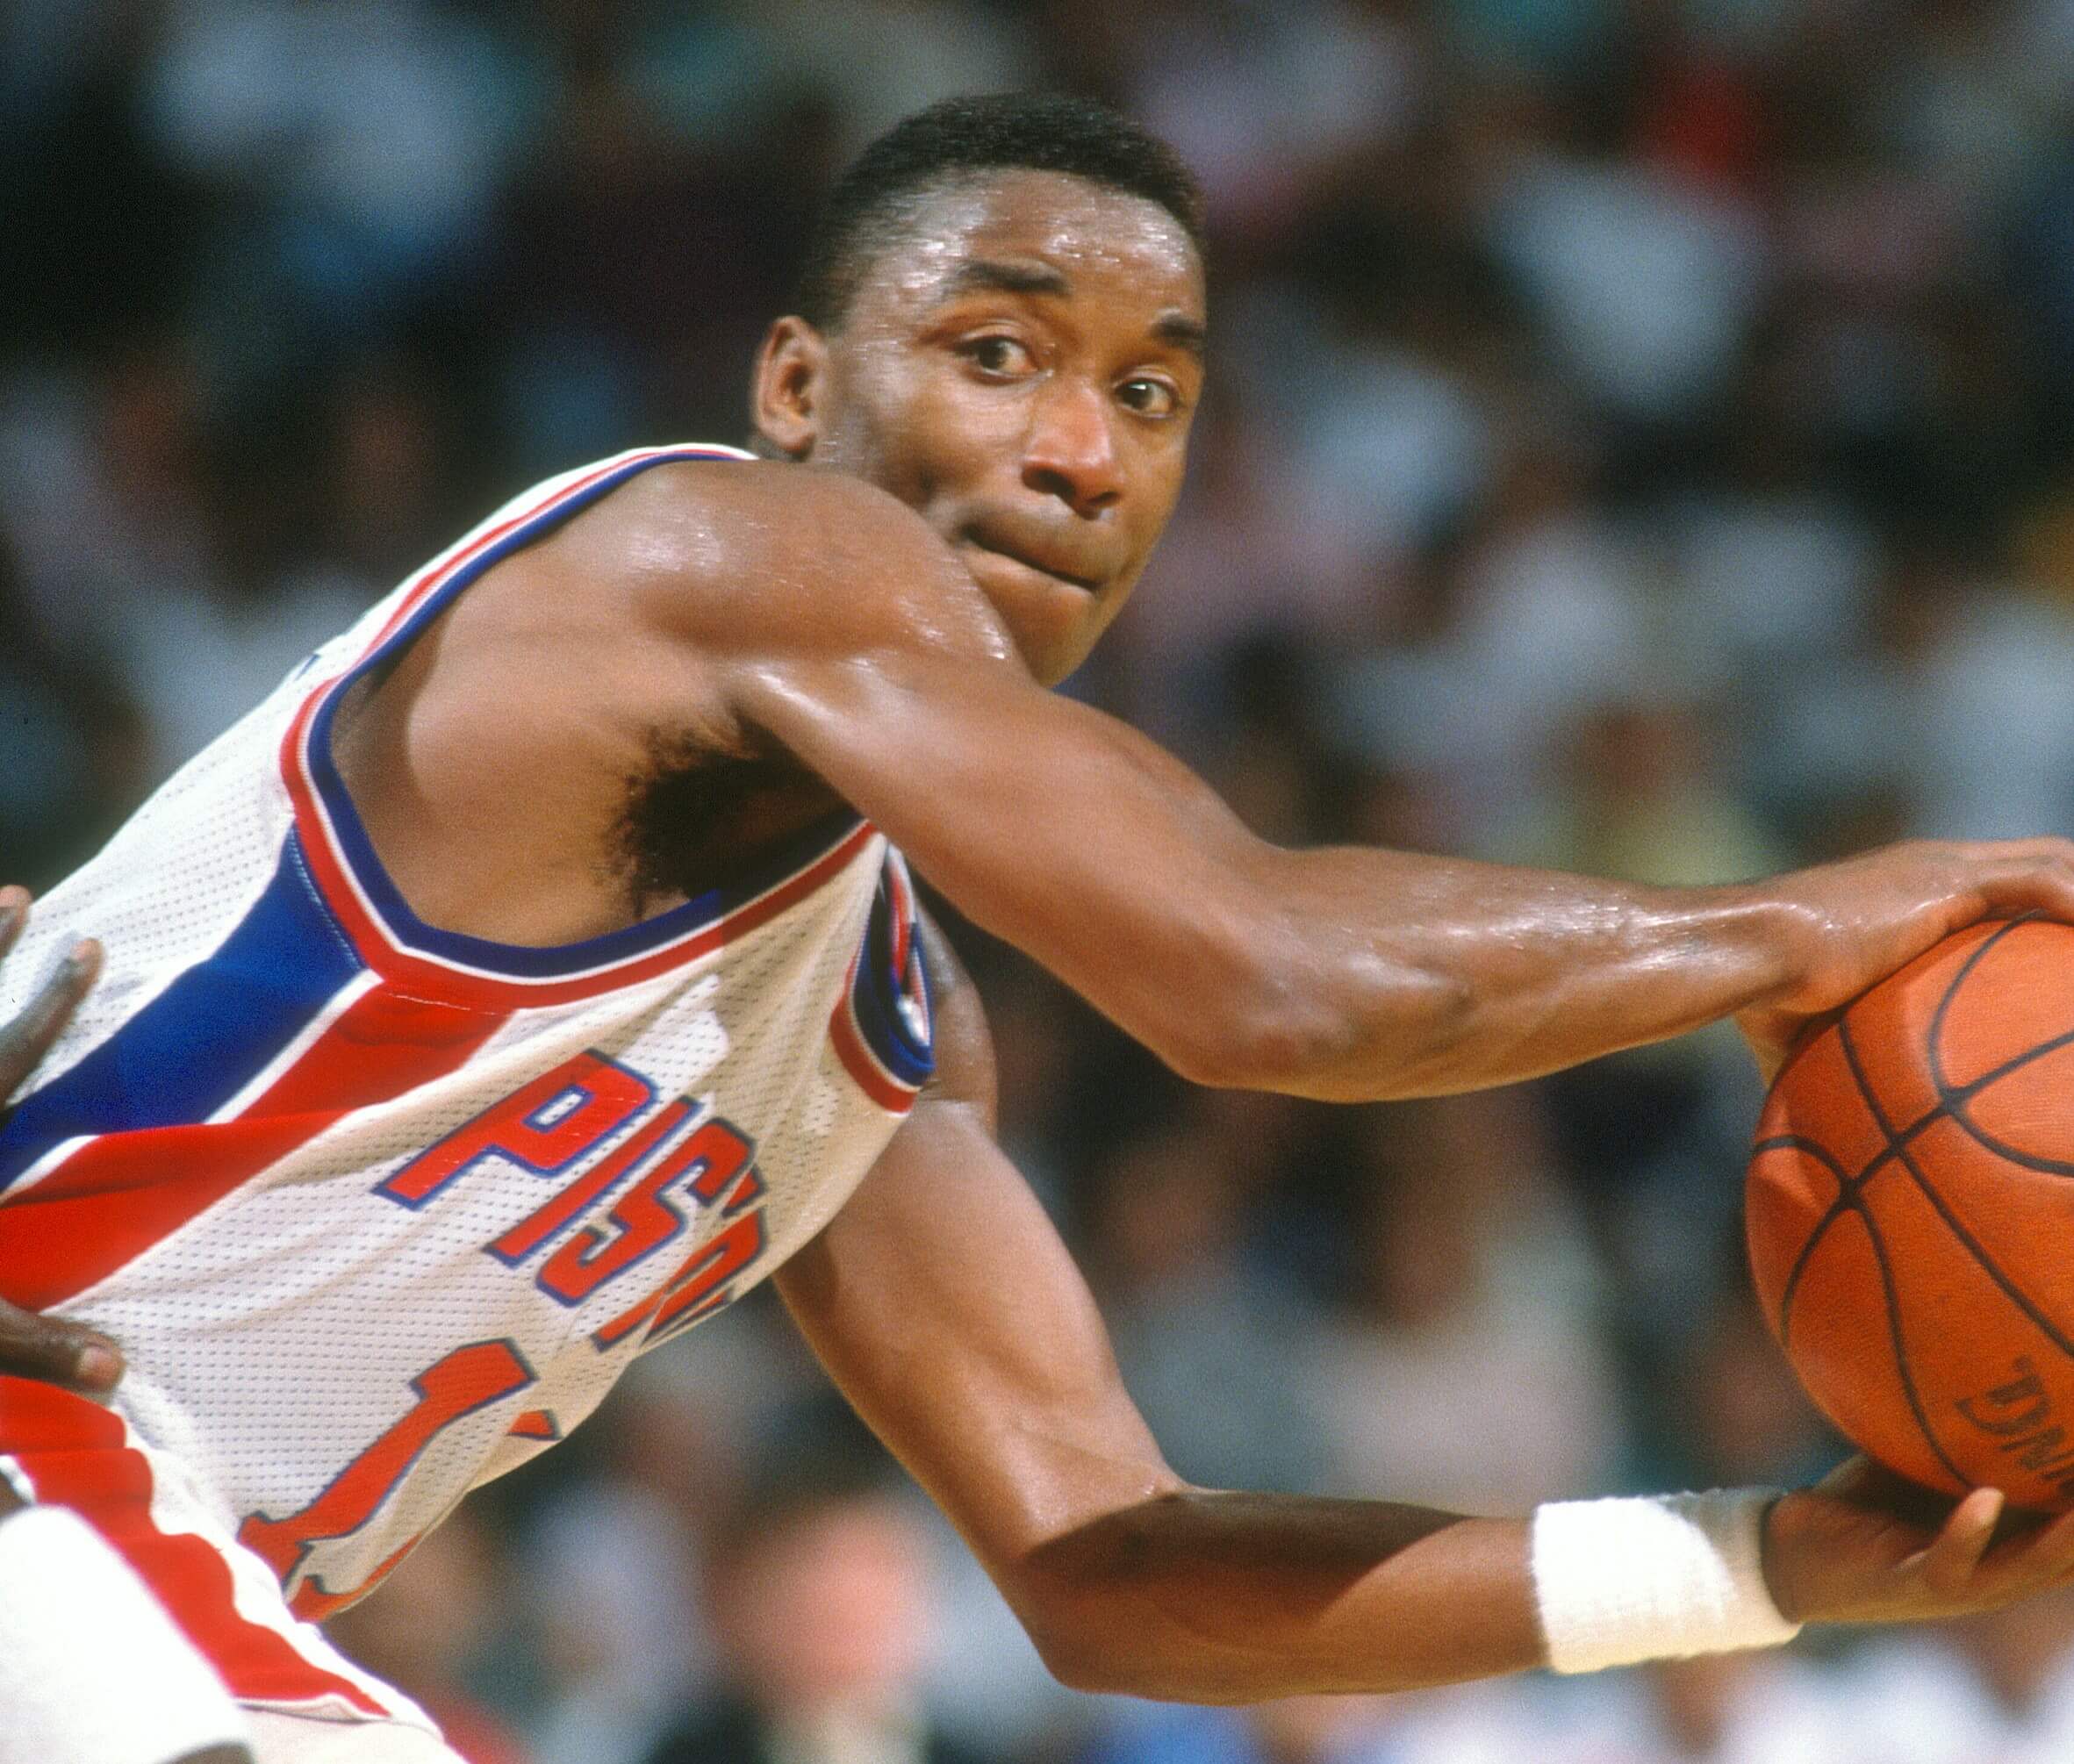 Isiah Thomas of the Detroit Pistons looks to pass the ball.